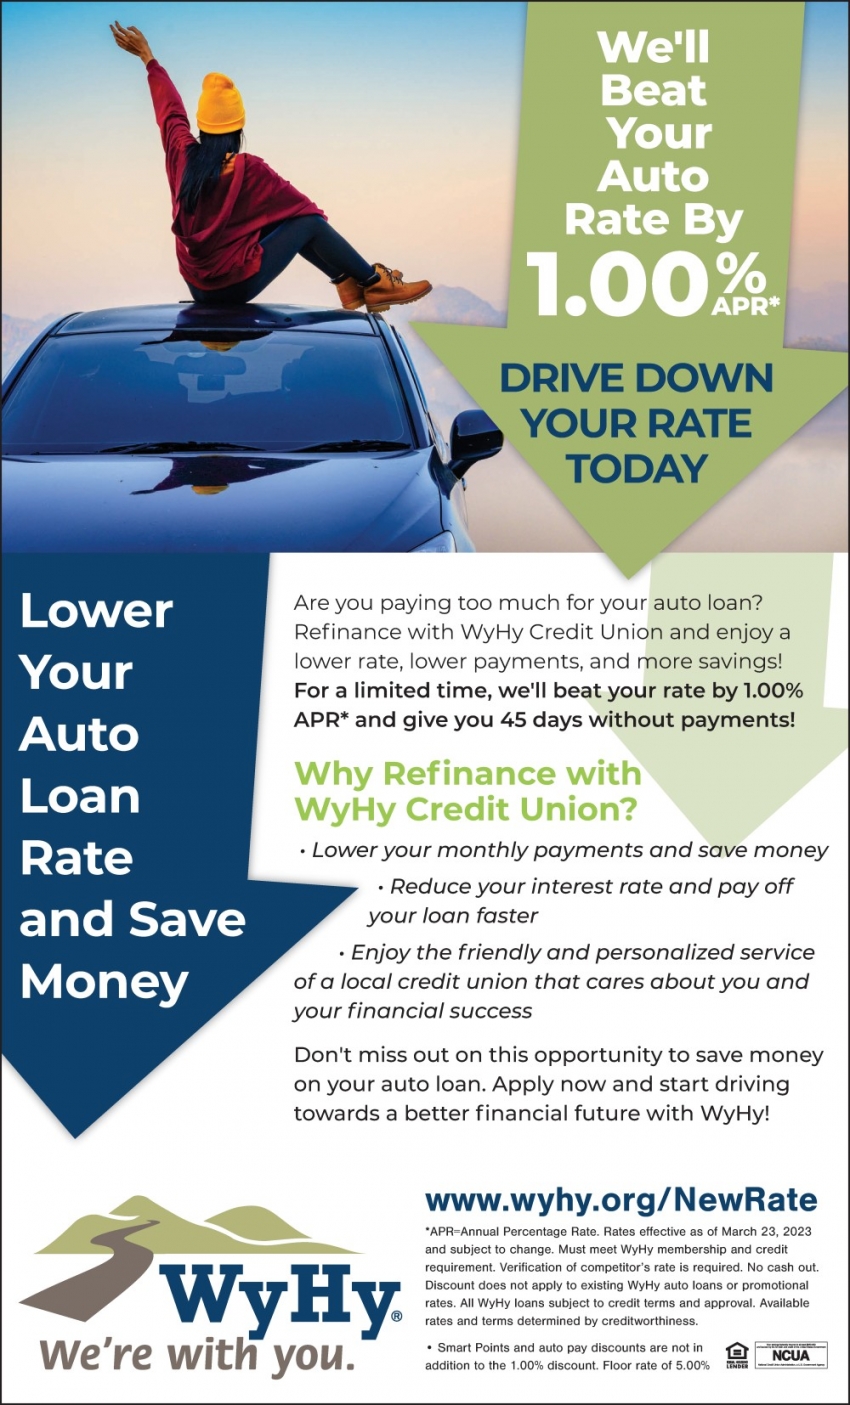 We'll Beat Your Auto Rate by 1.00% APR